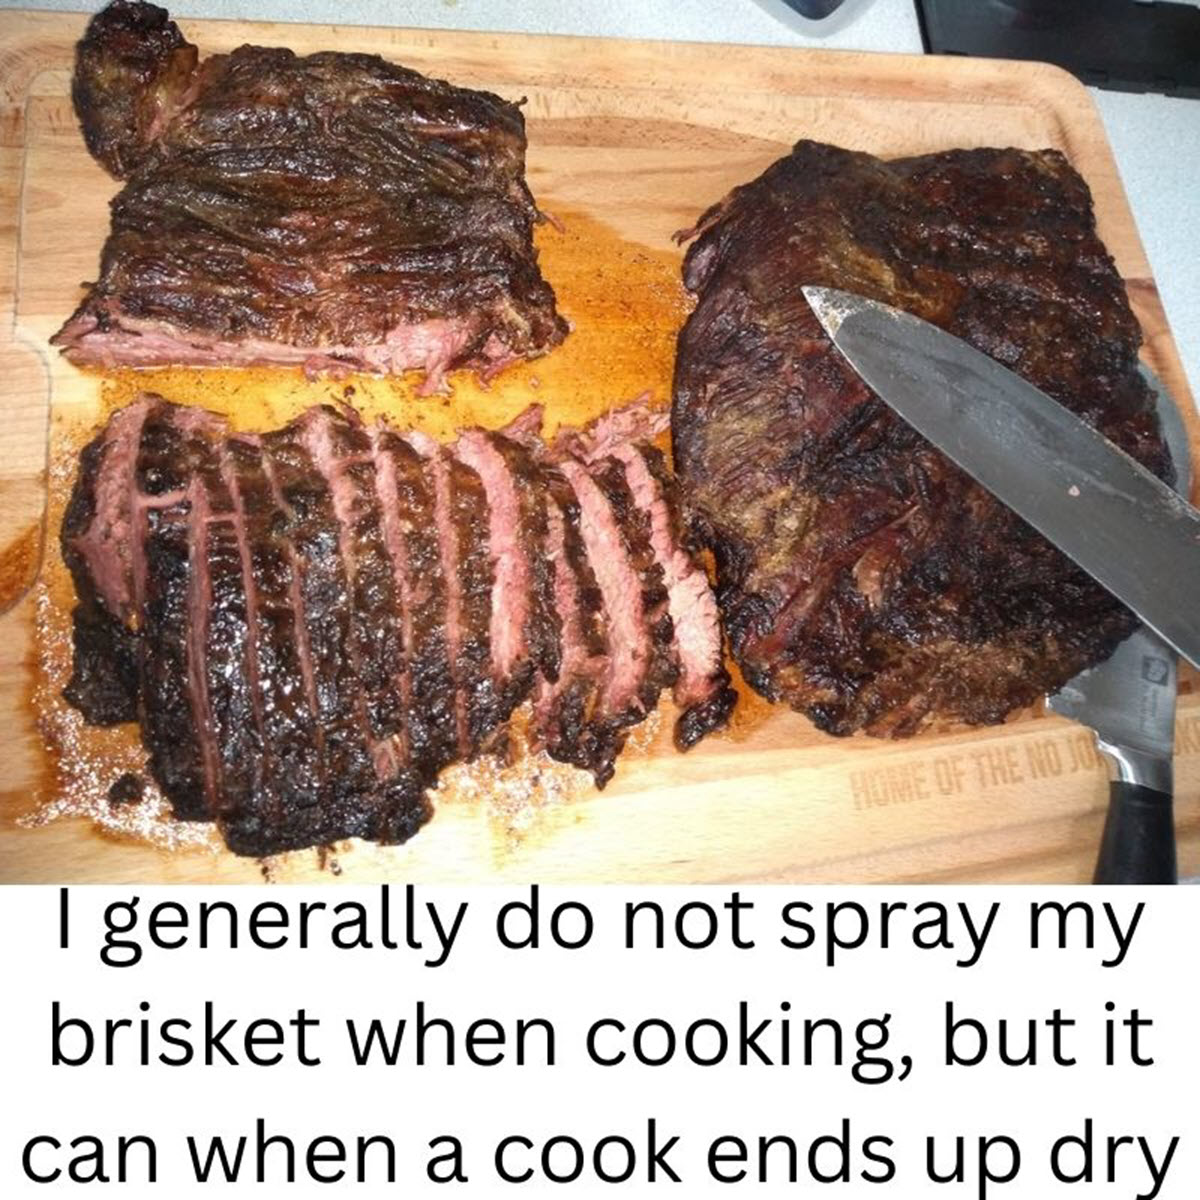 I usually do not spray my brisket when cooking, but sometimes it can help overcome a dry cook